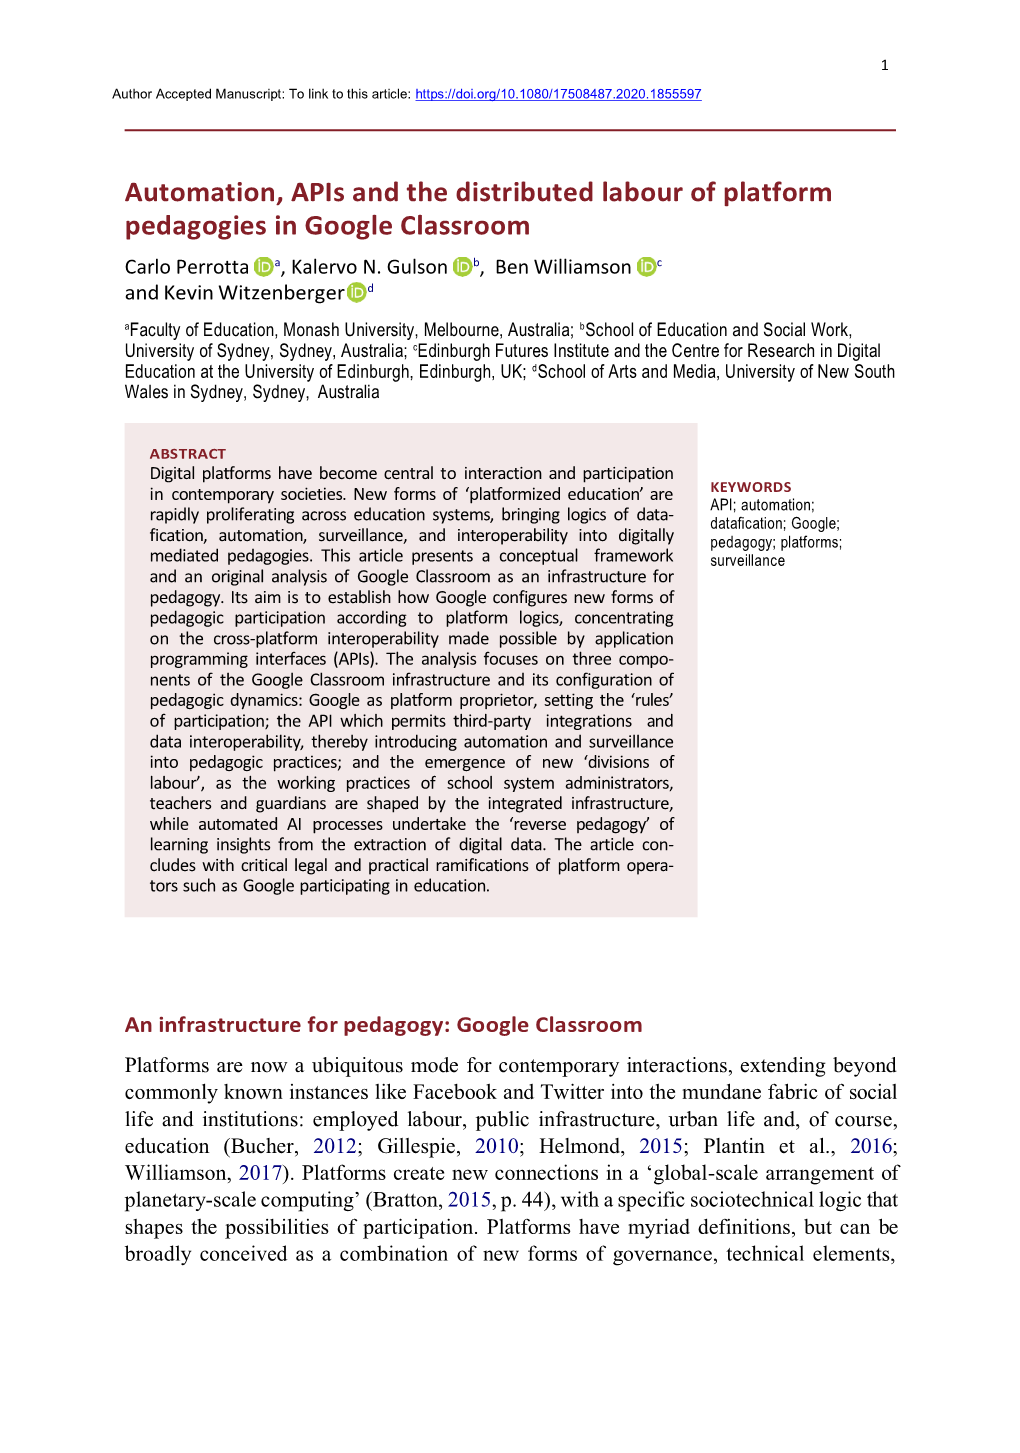 Automation, Apis and the Distributed Labour of Platform Pedagogies in Google Classroom